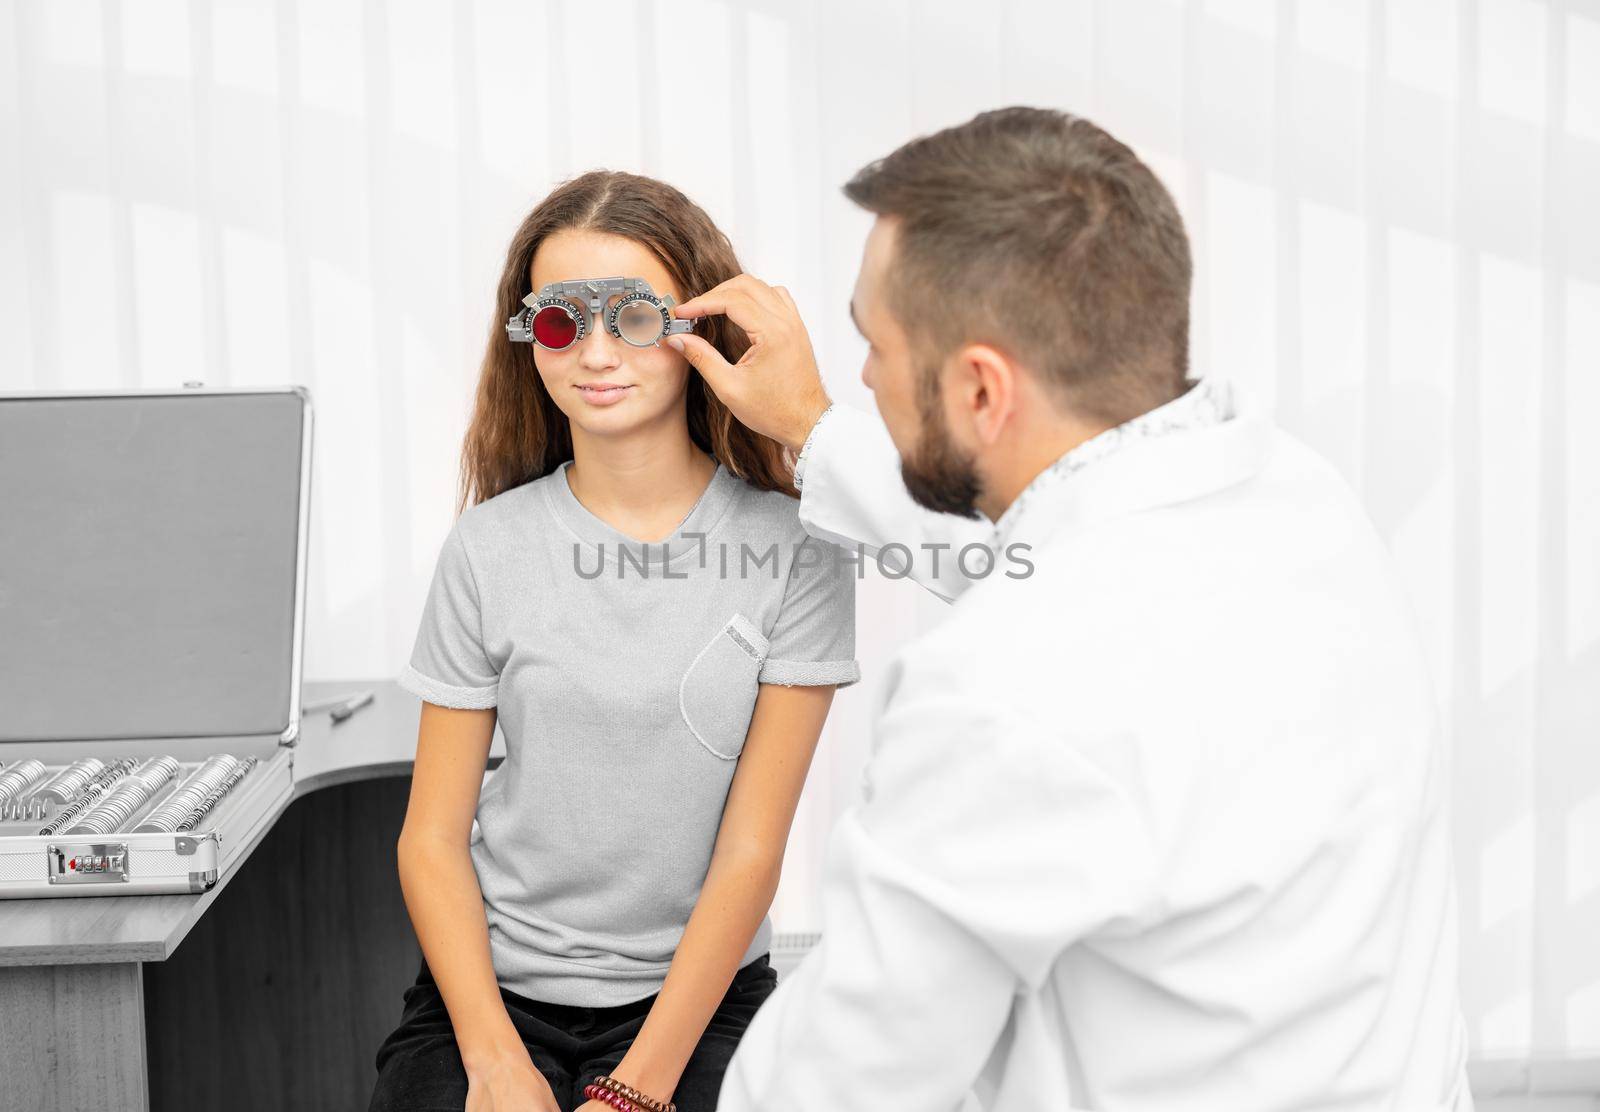 Doctor ophthalmologist holding special eye equipment examinating teenager girl's eyes in the clinic